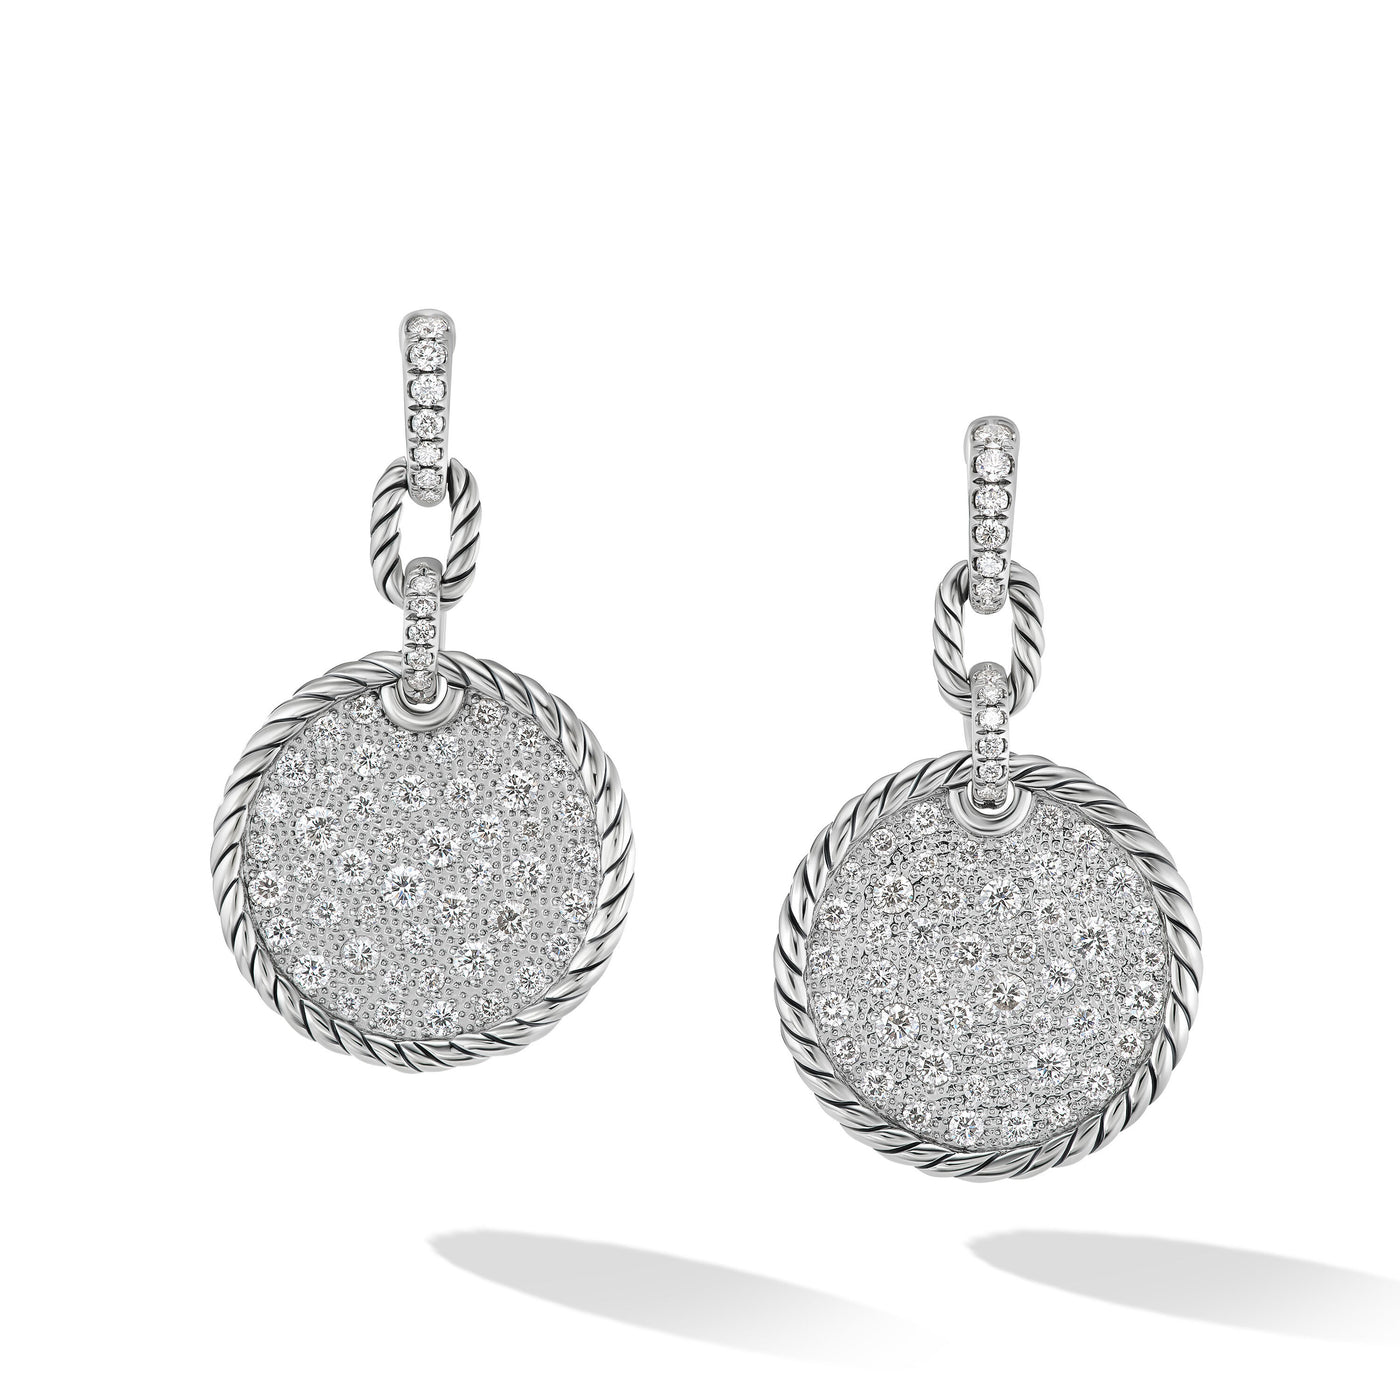 DY Elements® Convertible Drop Earrings in Sterling Silver with Diamonds\, 38.3mm